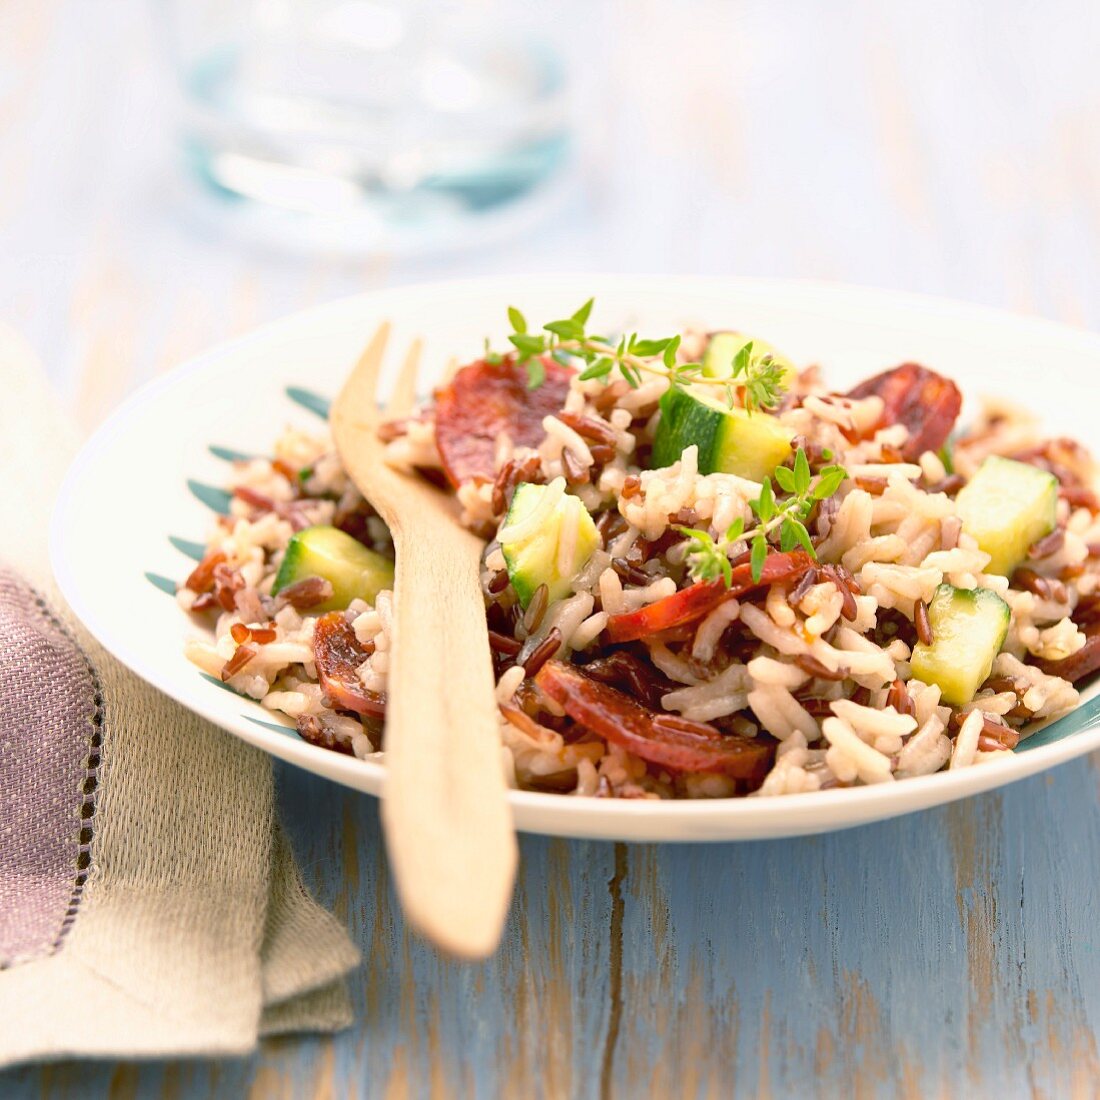 Camargue rice with chorizo and vegetables